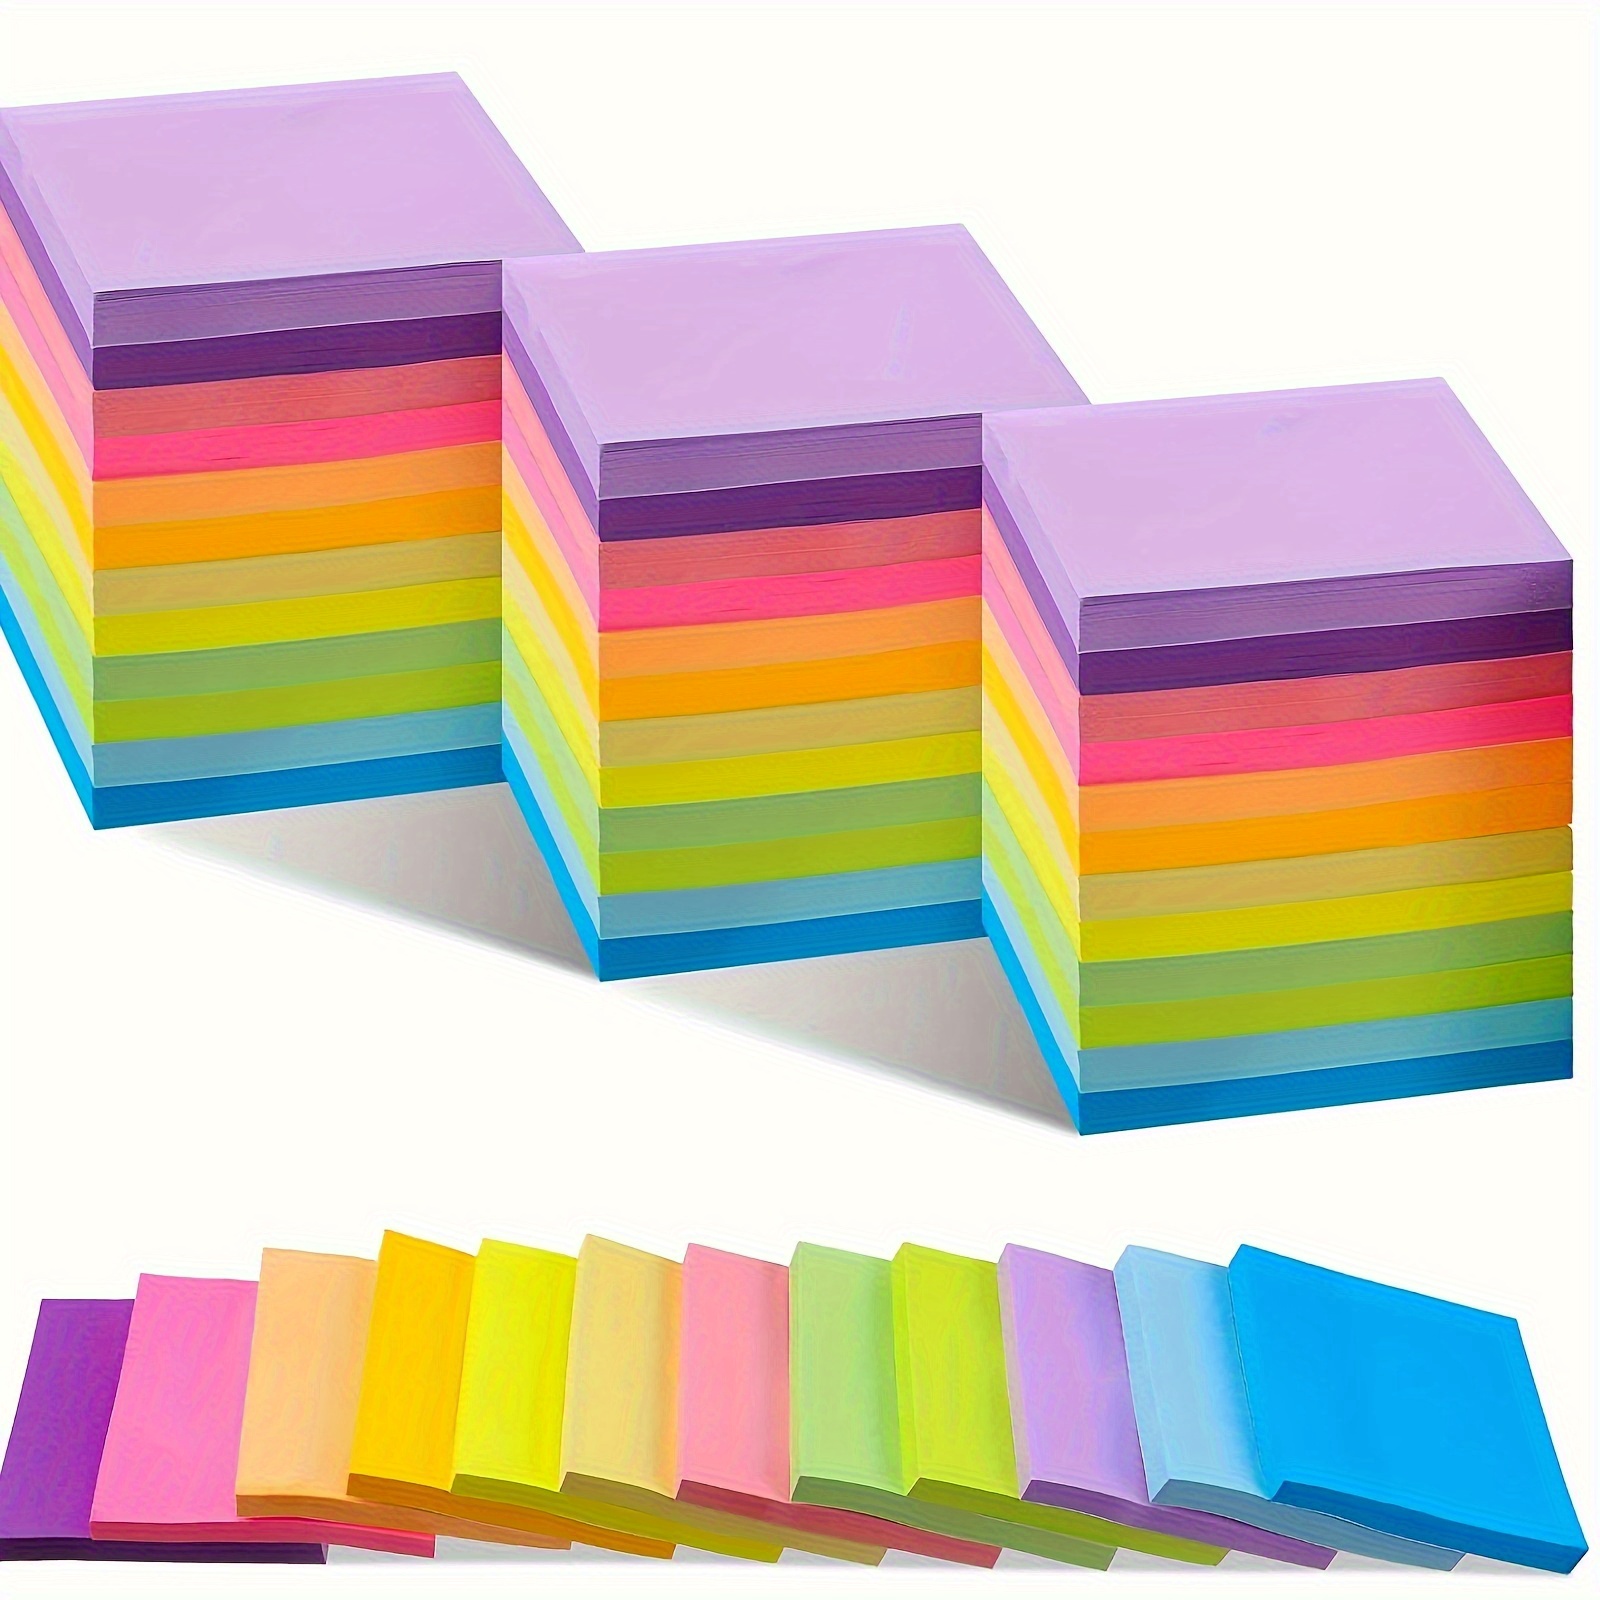 

6-piece Vibrant Sticky Notes - Easy Post, Self-adhesive Pads For Home & Office, 50 Sheets Each, Total 300 Sheets